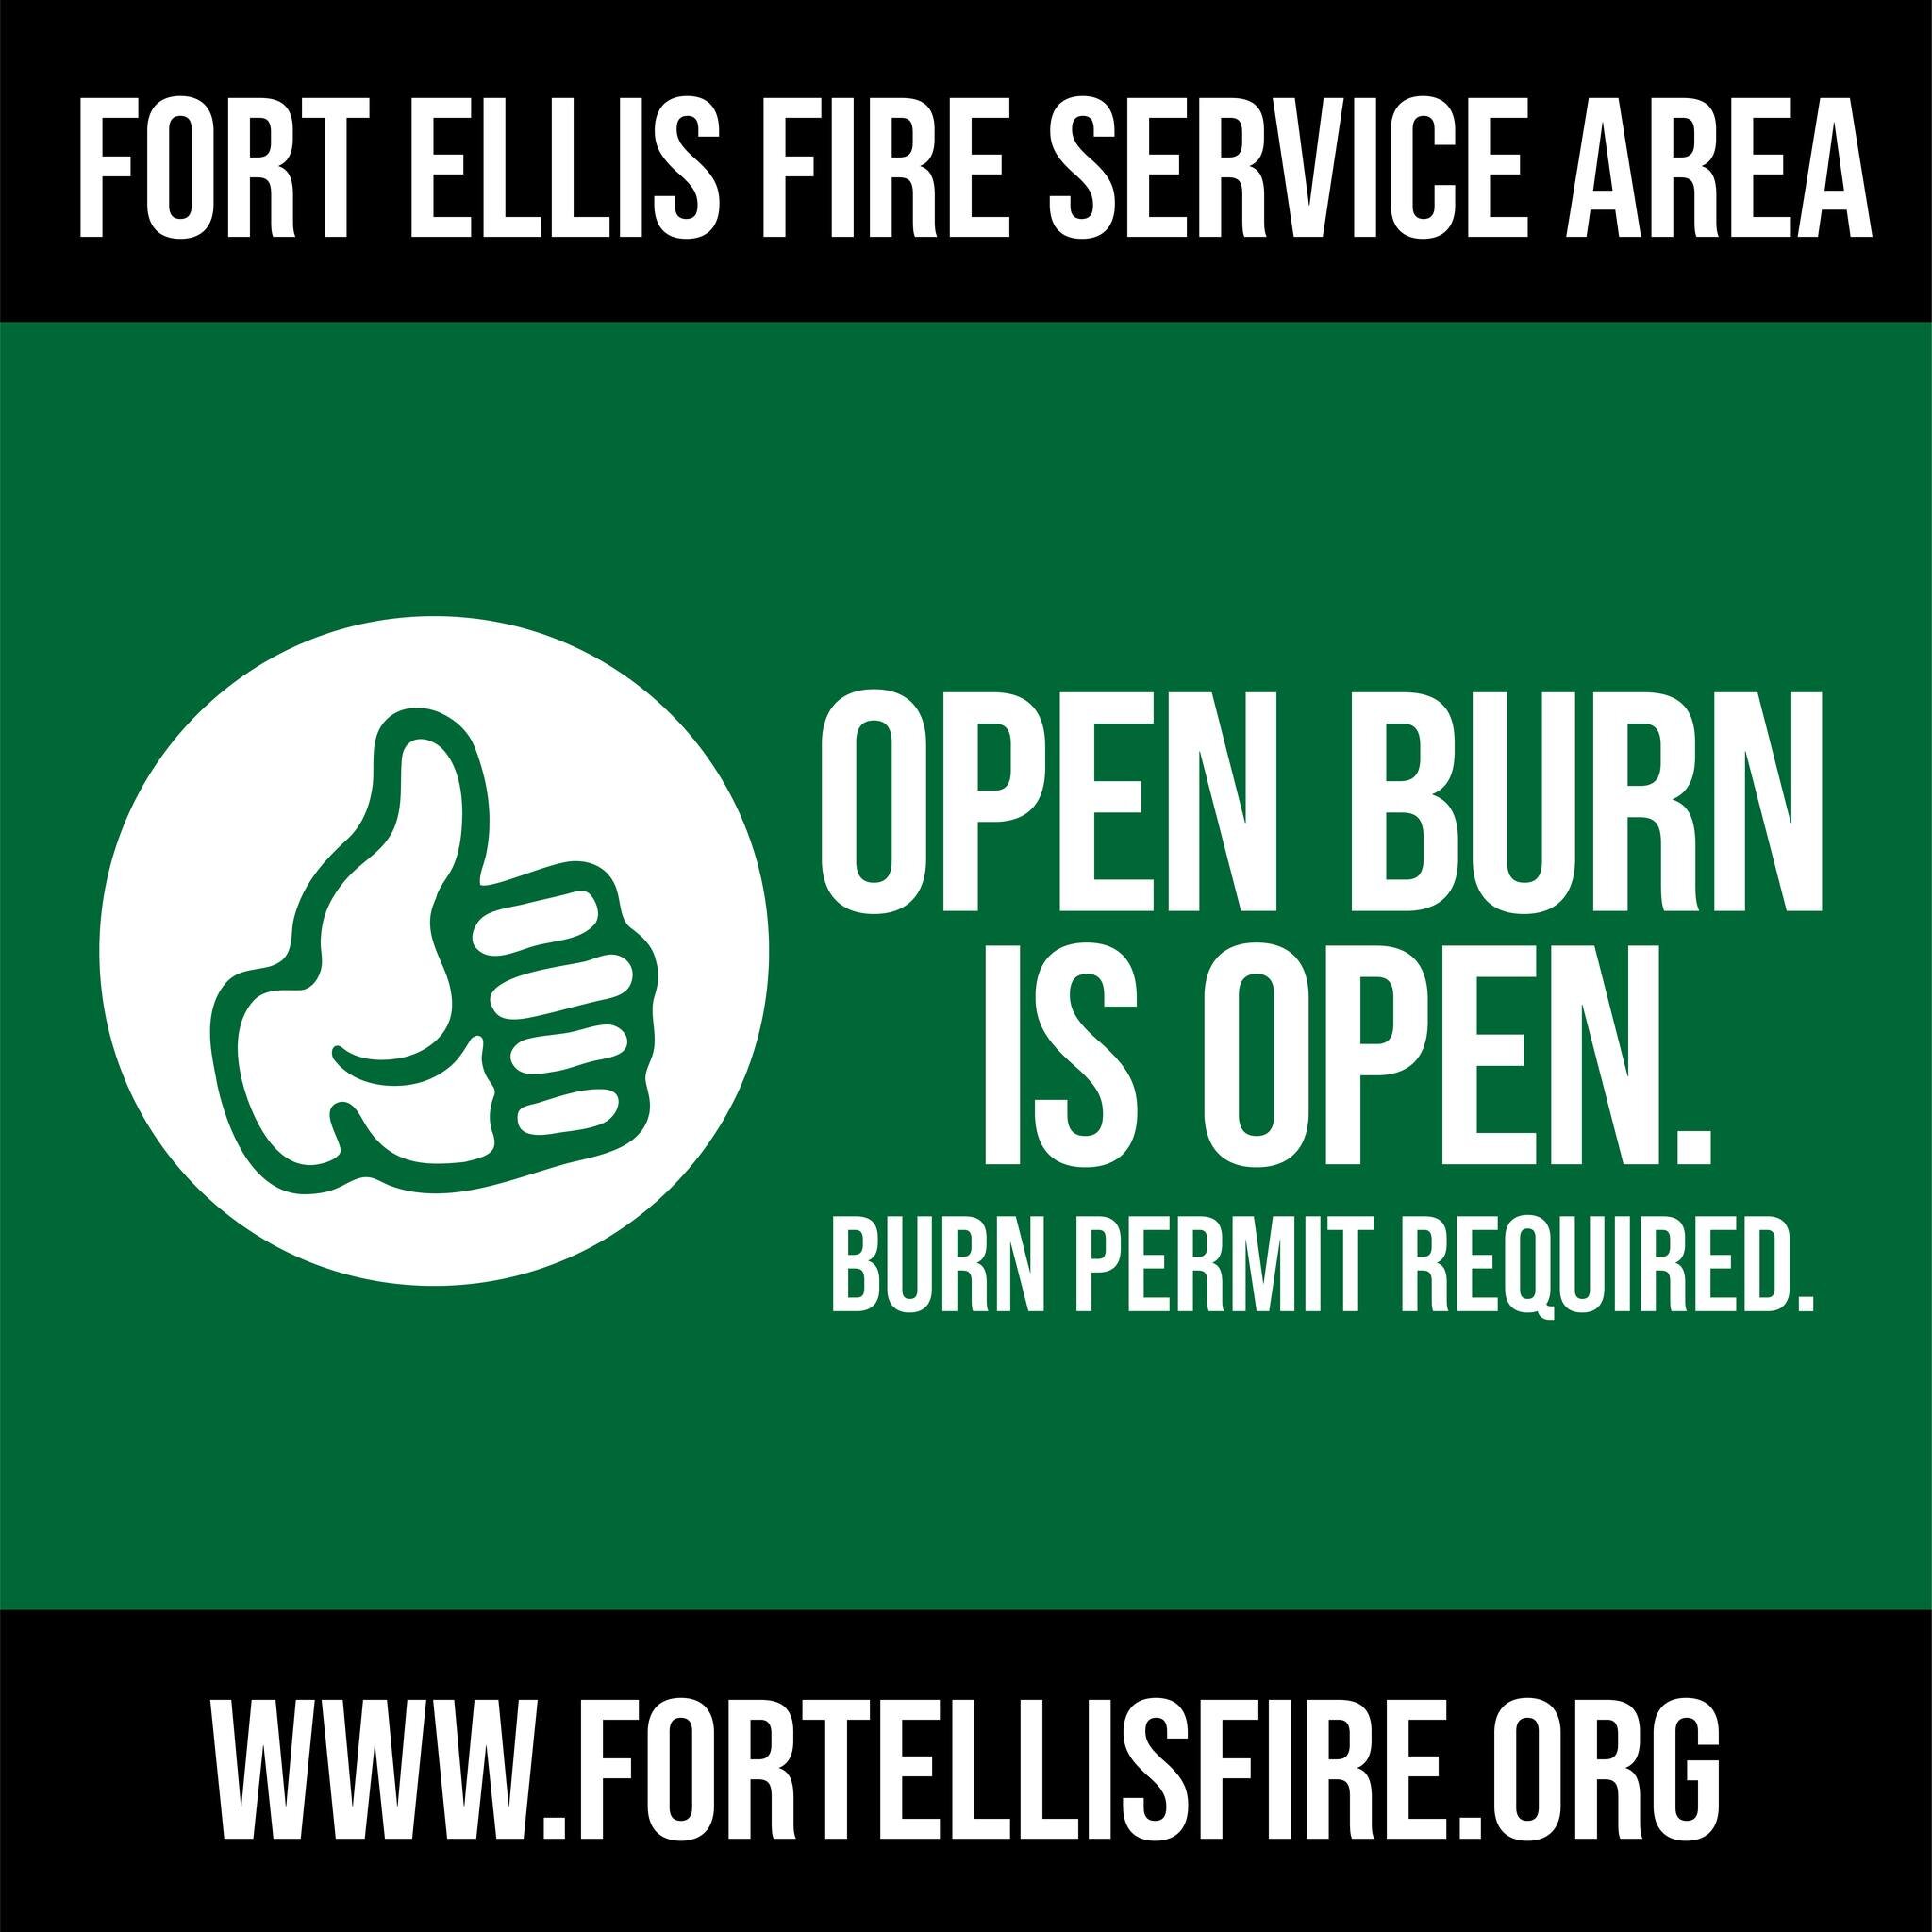 Check out our website for information and where you can get your permit! 
fortellisfire.org #openburning #dontforgetapermit